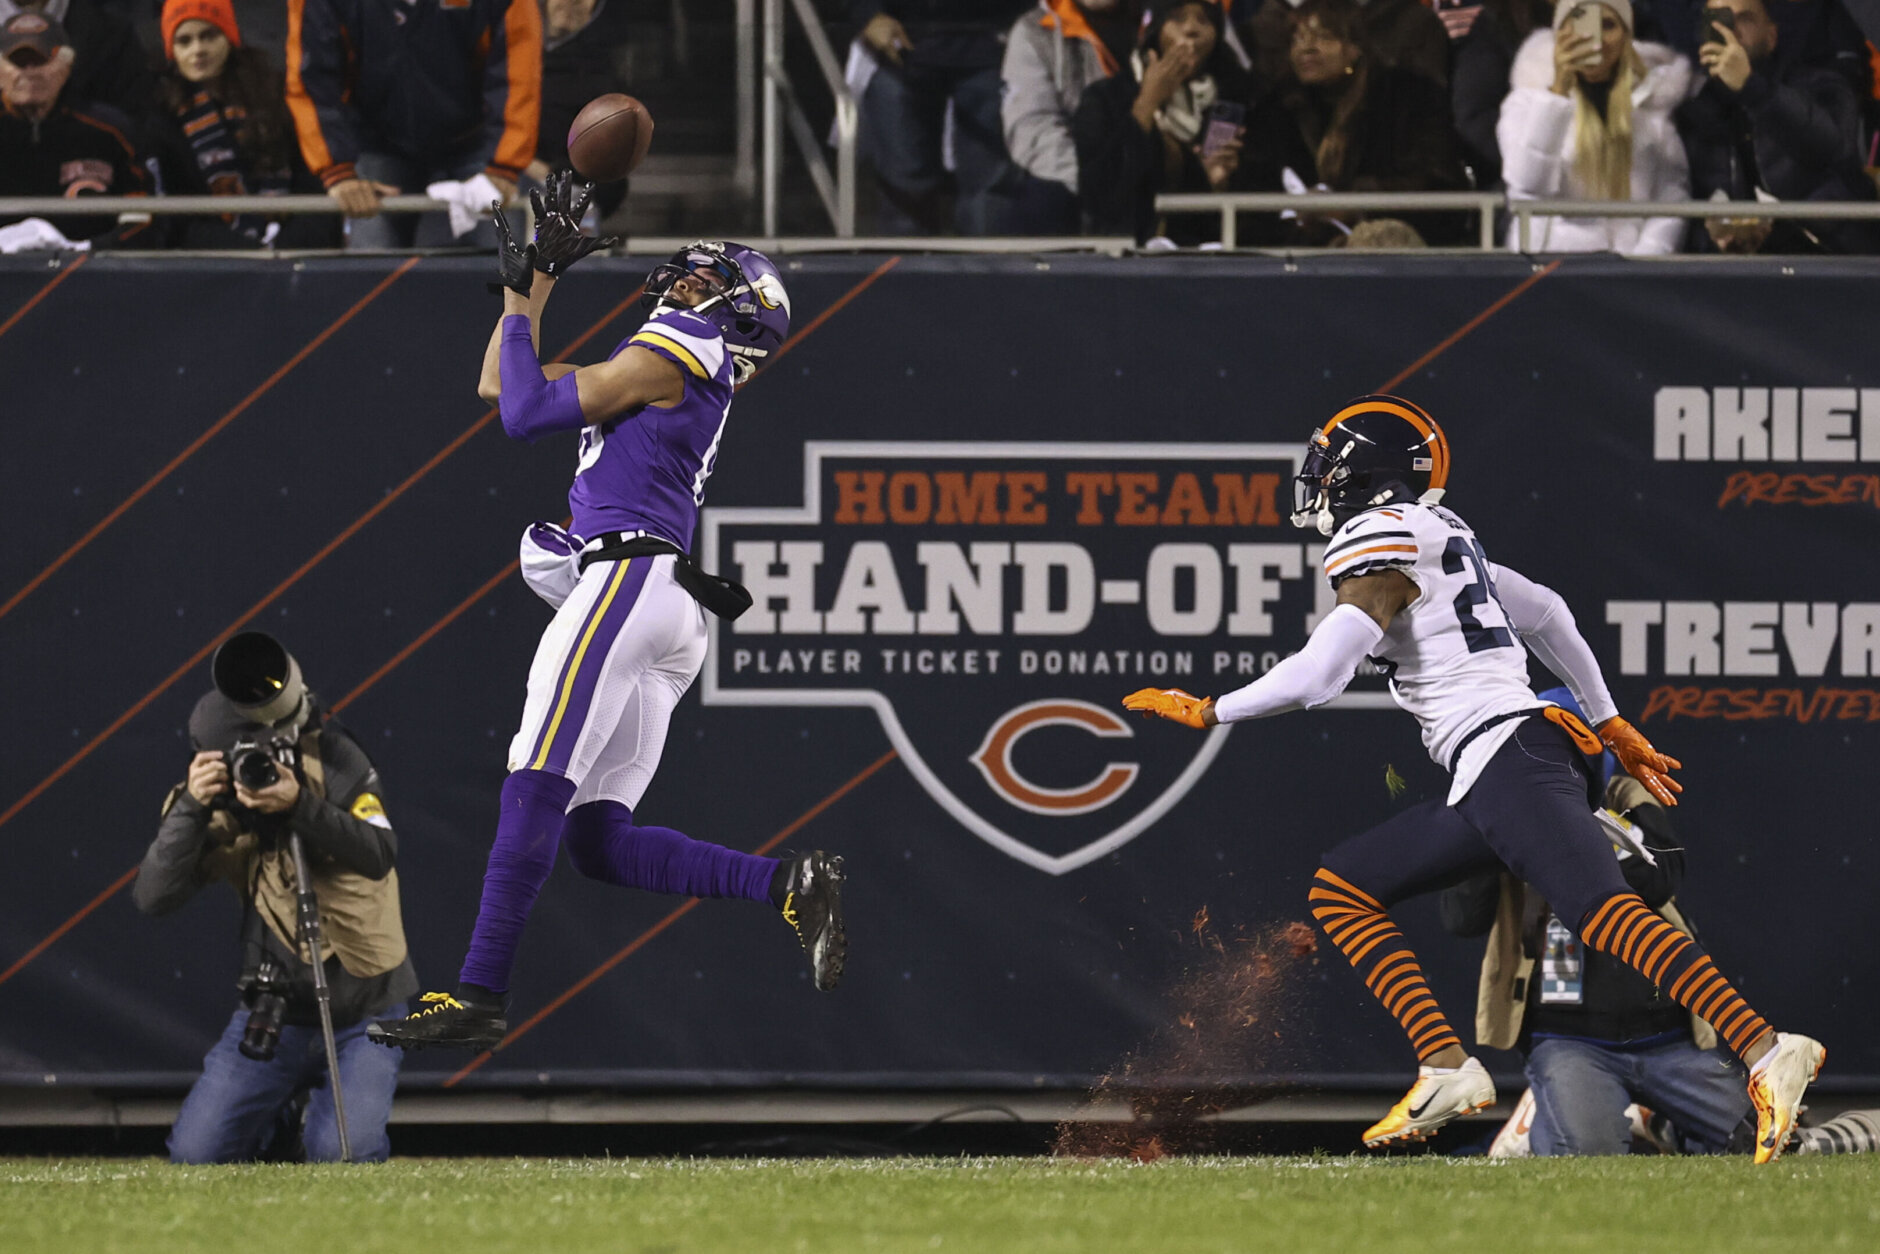 <p><em><strong>Vikings 17</strong></em><br />
<em><strong>Bears 9</strong></em></p>
<p>Two thoughts from this game: First, how good would Justin Fields be if he actually had some help around him? Secondly, wouldn&#8217;t it be something if Kirk Cousins led Minnesota to the playoffs to keep Washington home for the holidays?</p>
